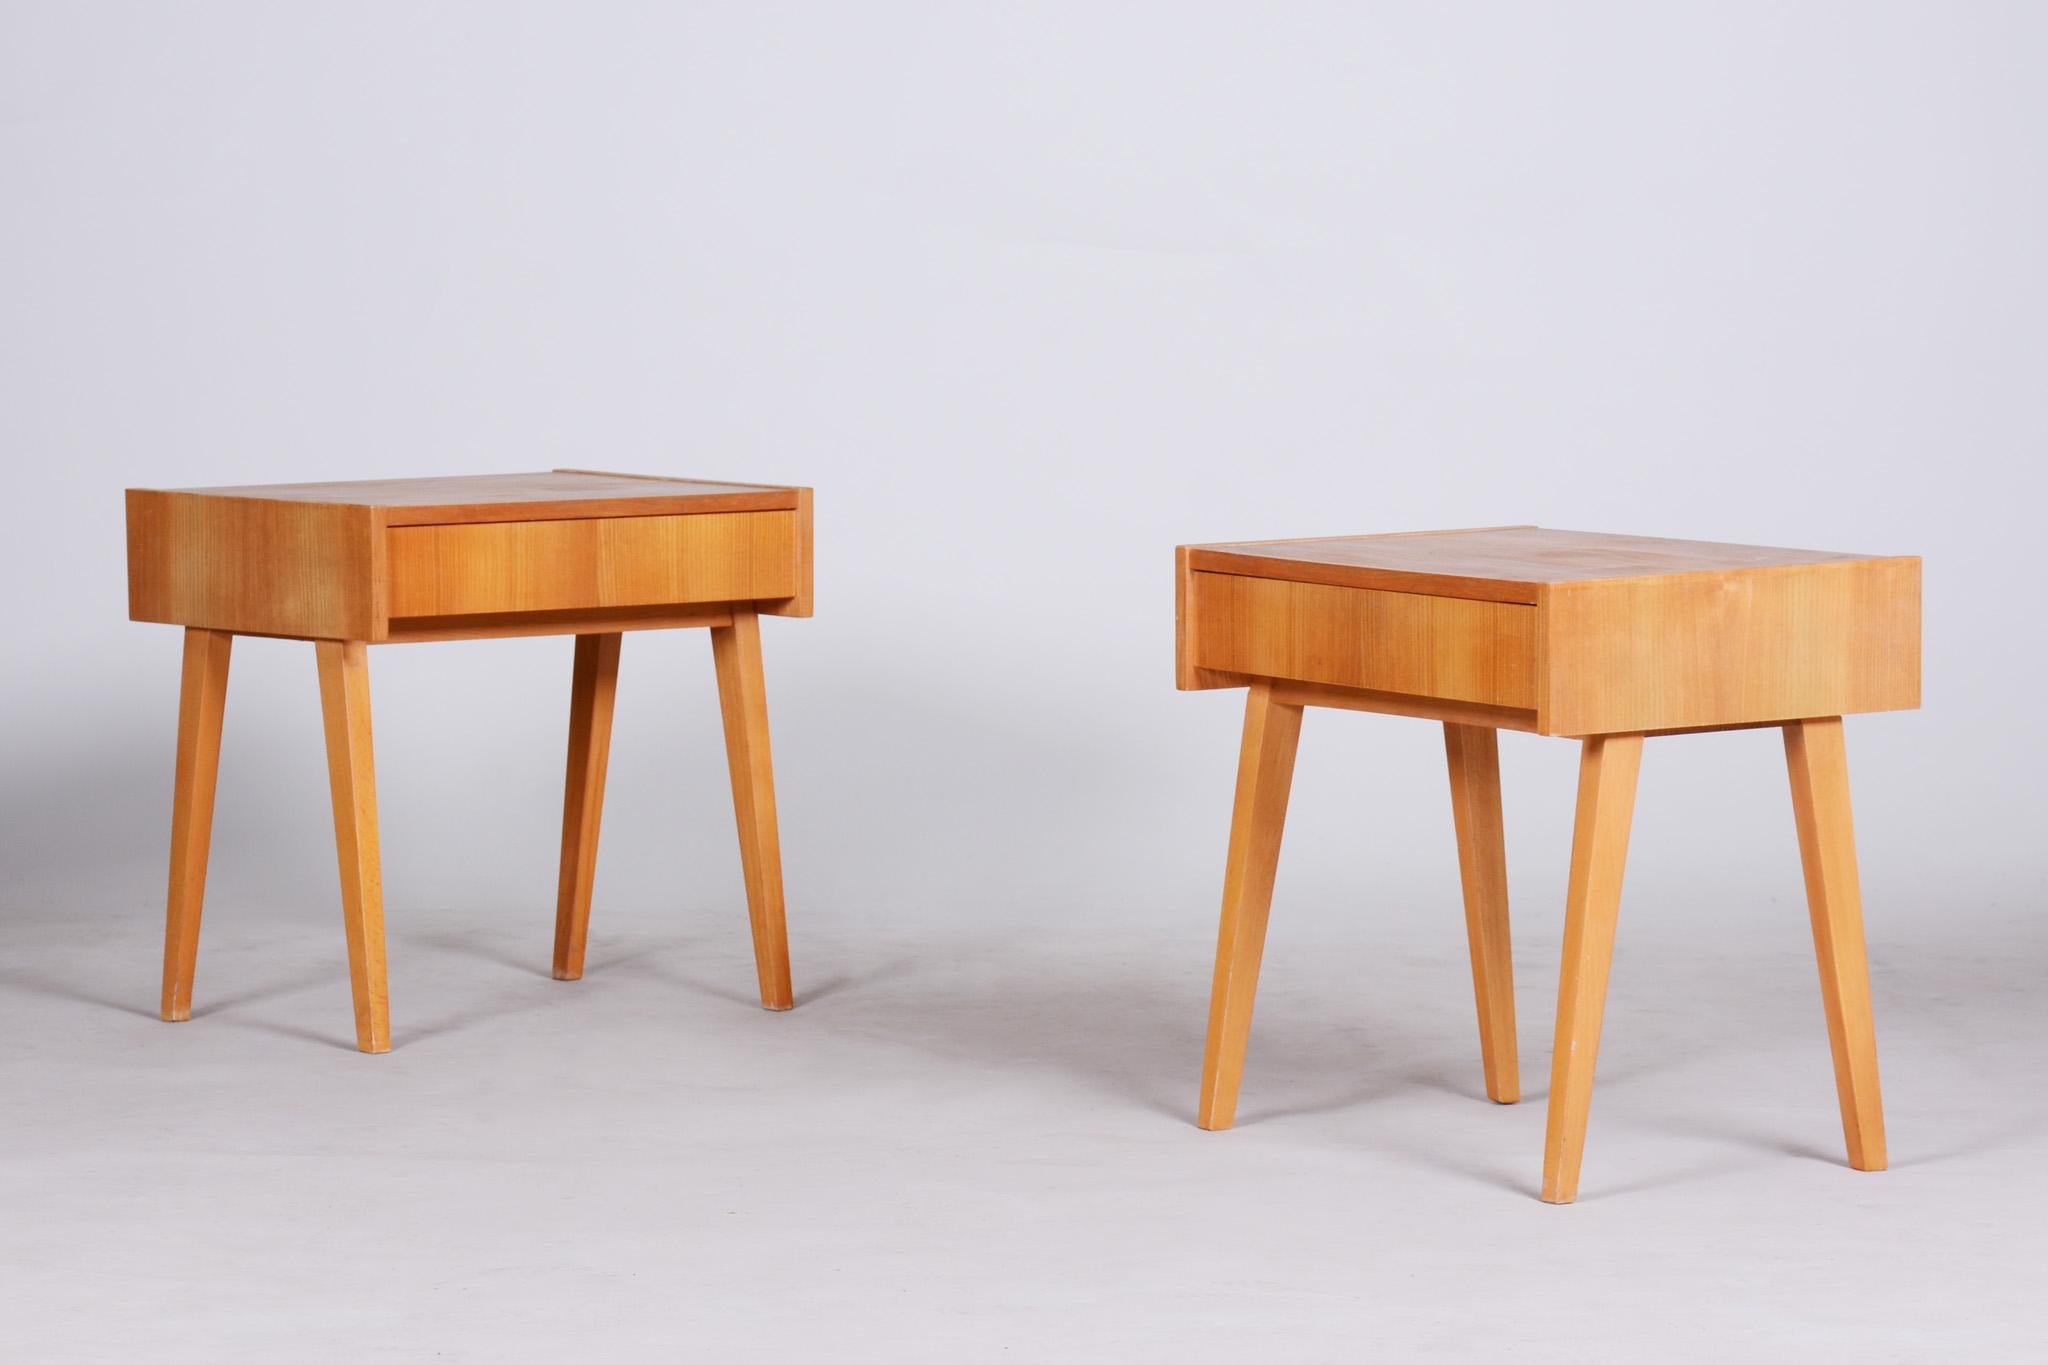 Pair of Ash Brown Midcentury Modeern Bedside Tables Made in Czechia, 1950s 4